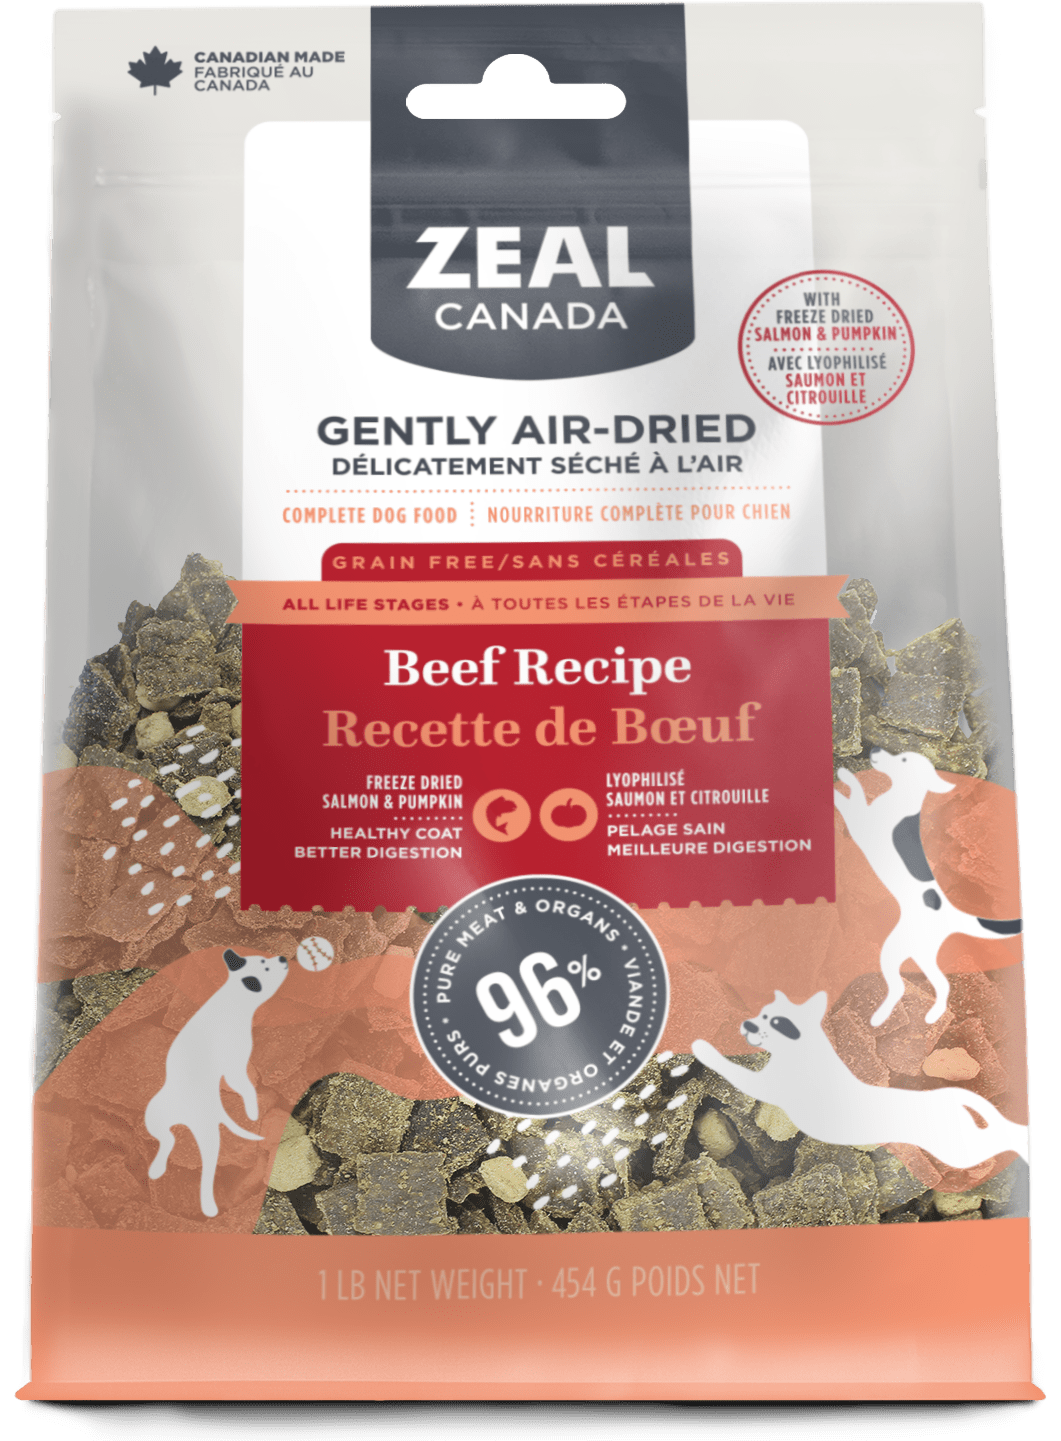 Zeal Canada - Gently Air-Dried Beef With Freeze-Dried Salmon & Pumpkin (For Dogs)